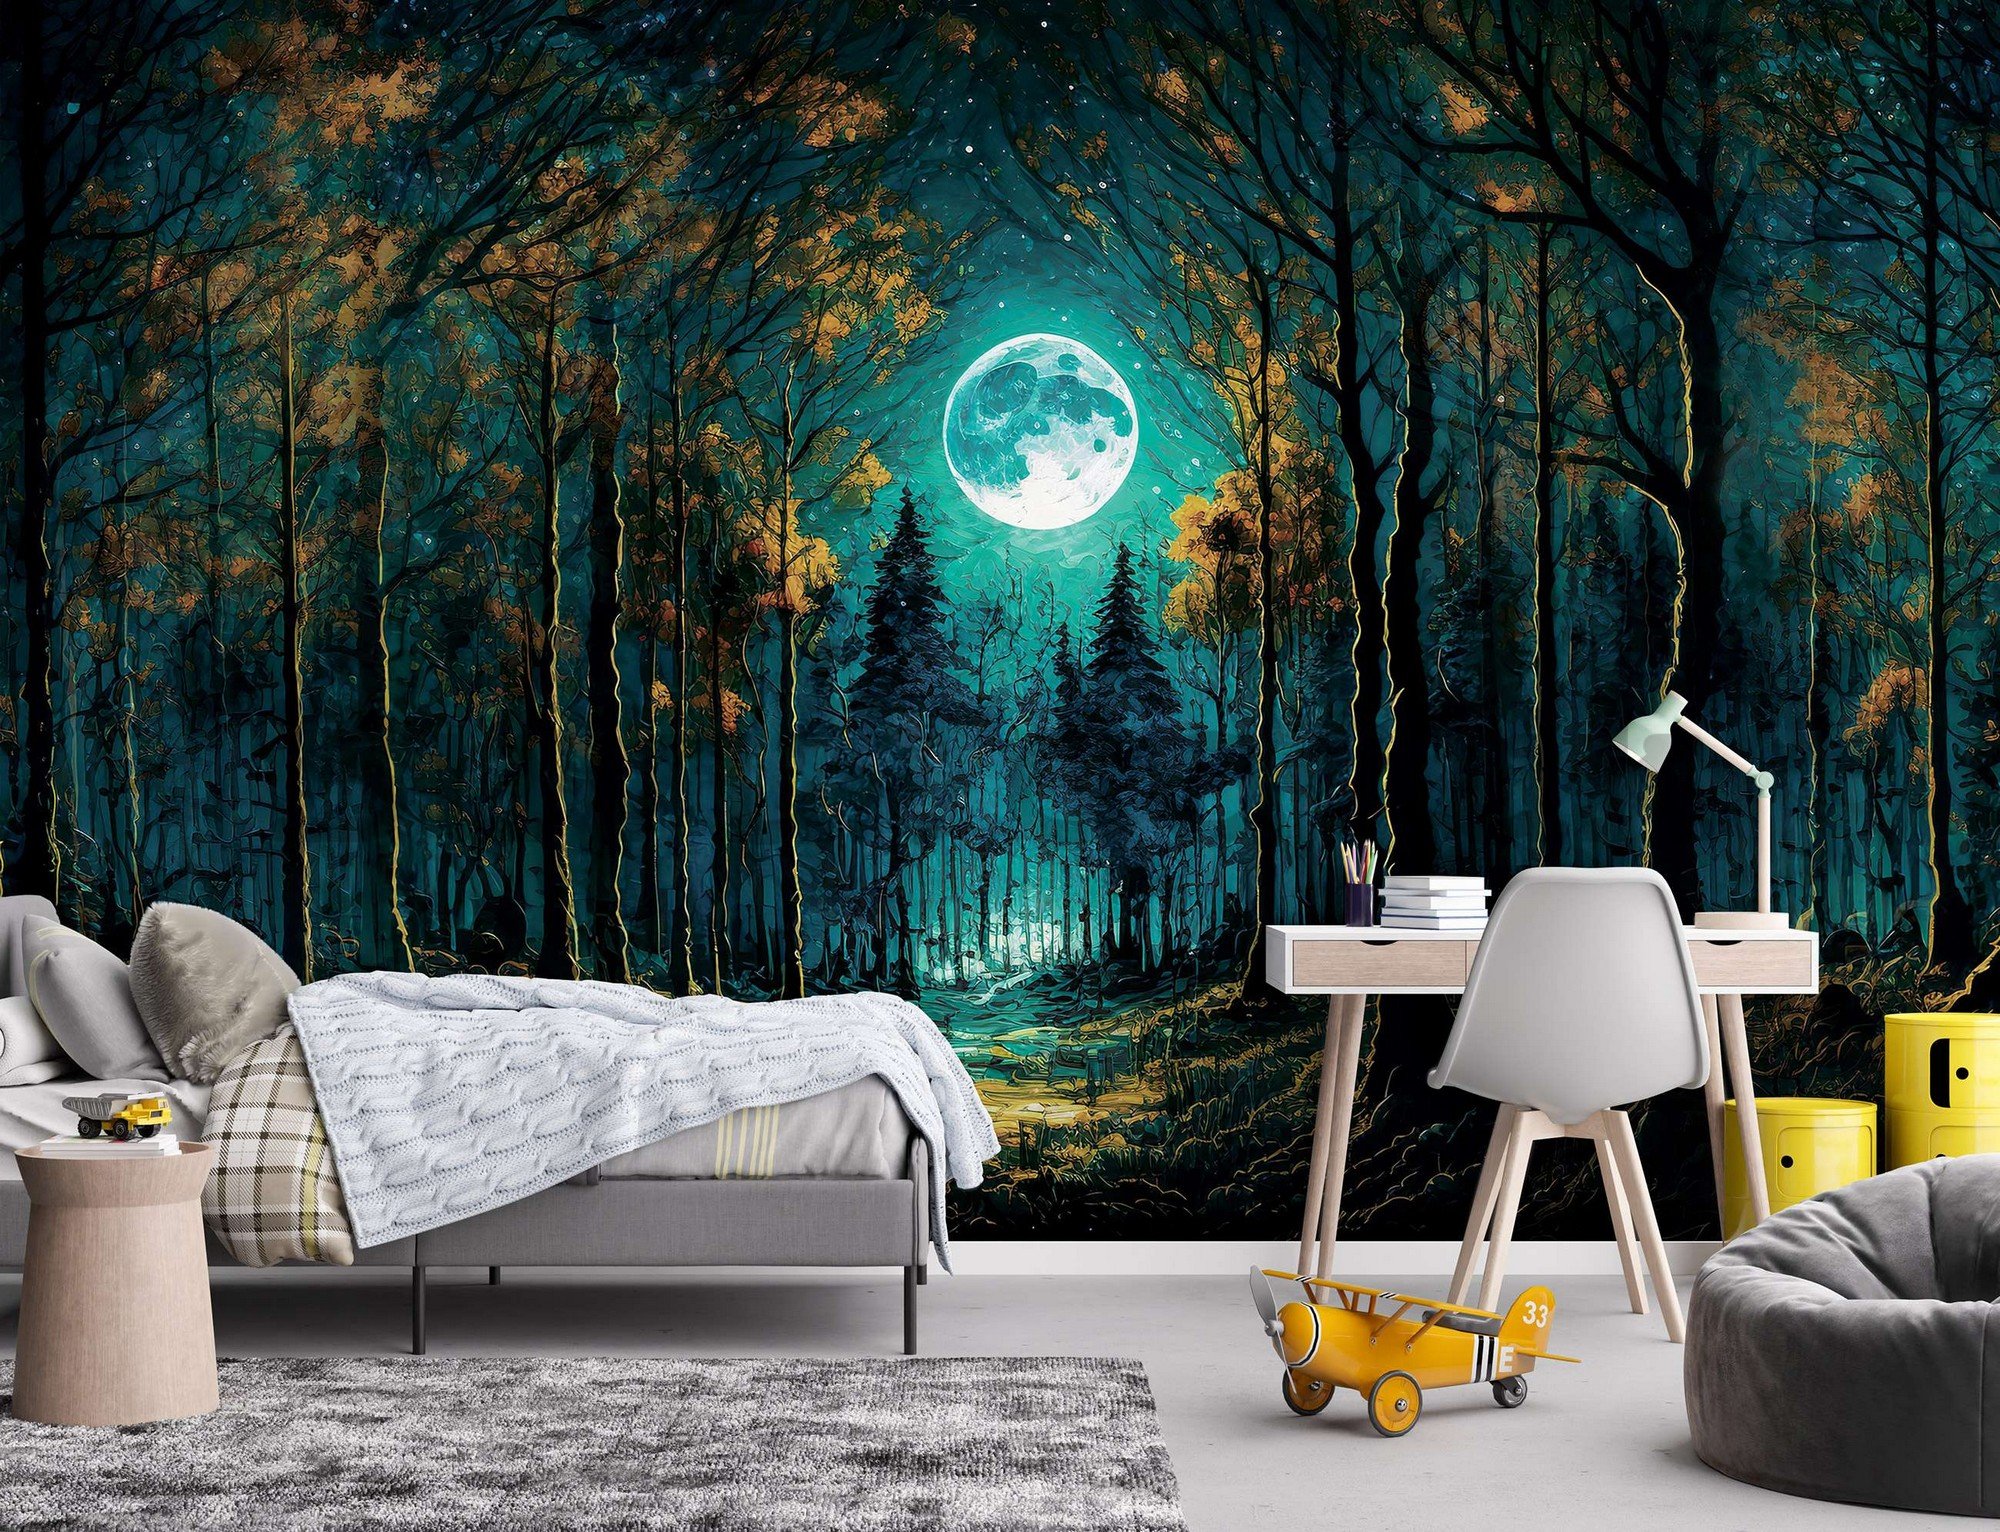 Wall mural vlies: Full moon in the forest - 368x254 cm